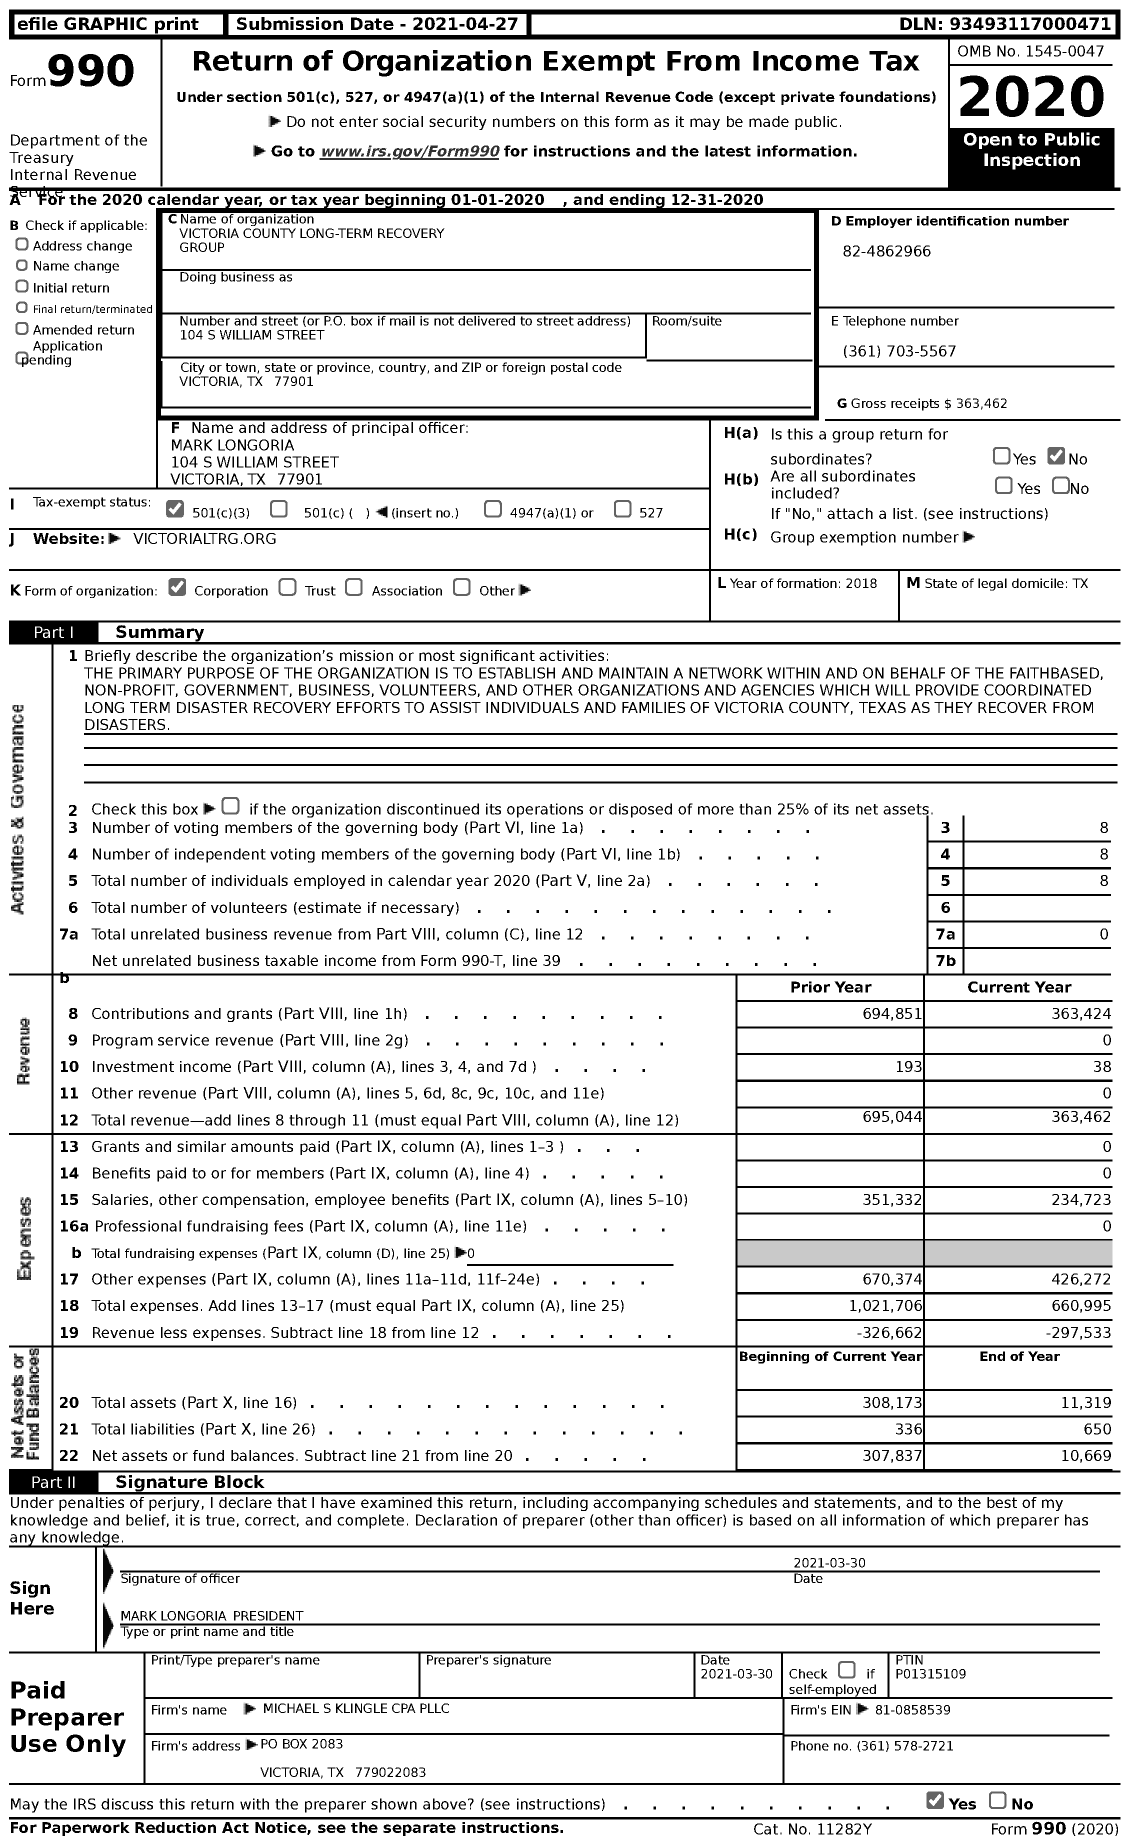 Image of first page of 2020 Form 990 for Victoria County Long-Term Recovery Group